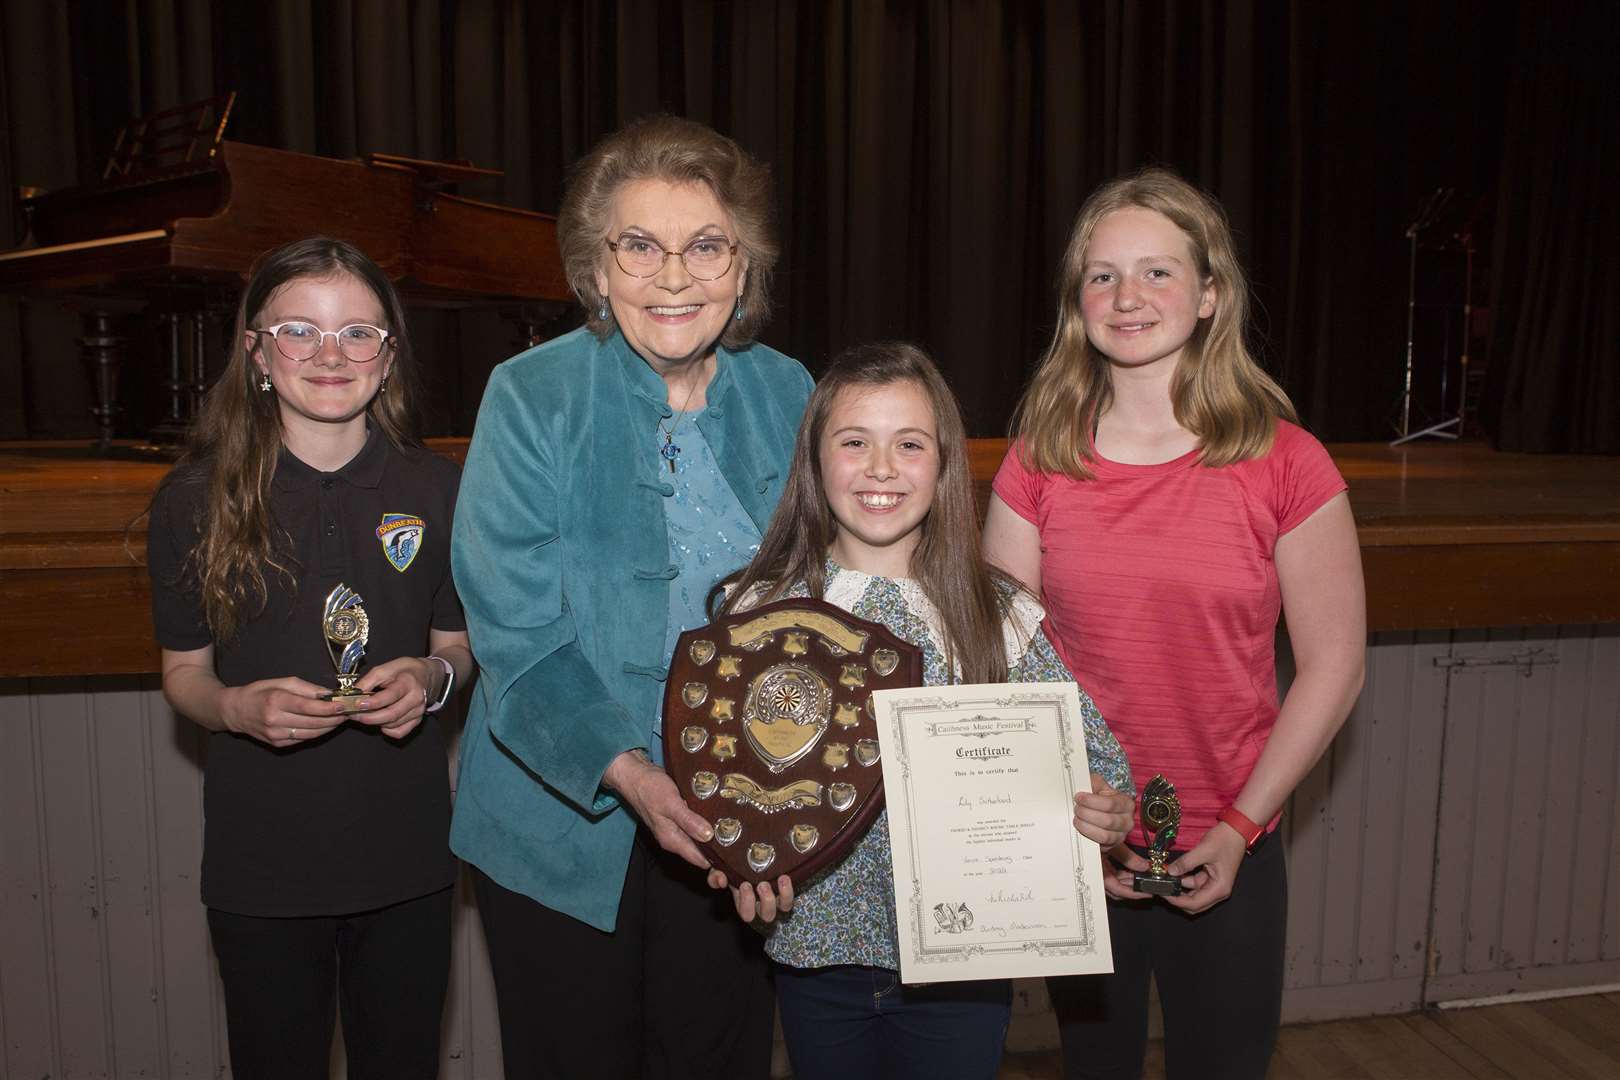 Lily Sutherland, of Wick, won the Thurso and District Round Table Shield, the overall trophy for verse-speaking. She received the trophy from adjudicator Norma Redfearn, alongside other finalists Skye Bain (left), Dunbeath, and Kirsty May, Thurso High School. Picture: Robert MacDonald / Northern Studios